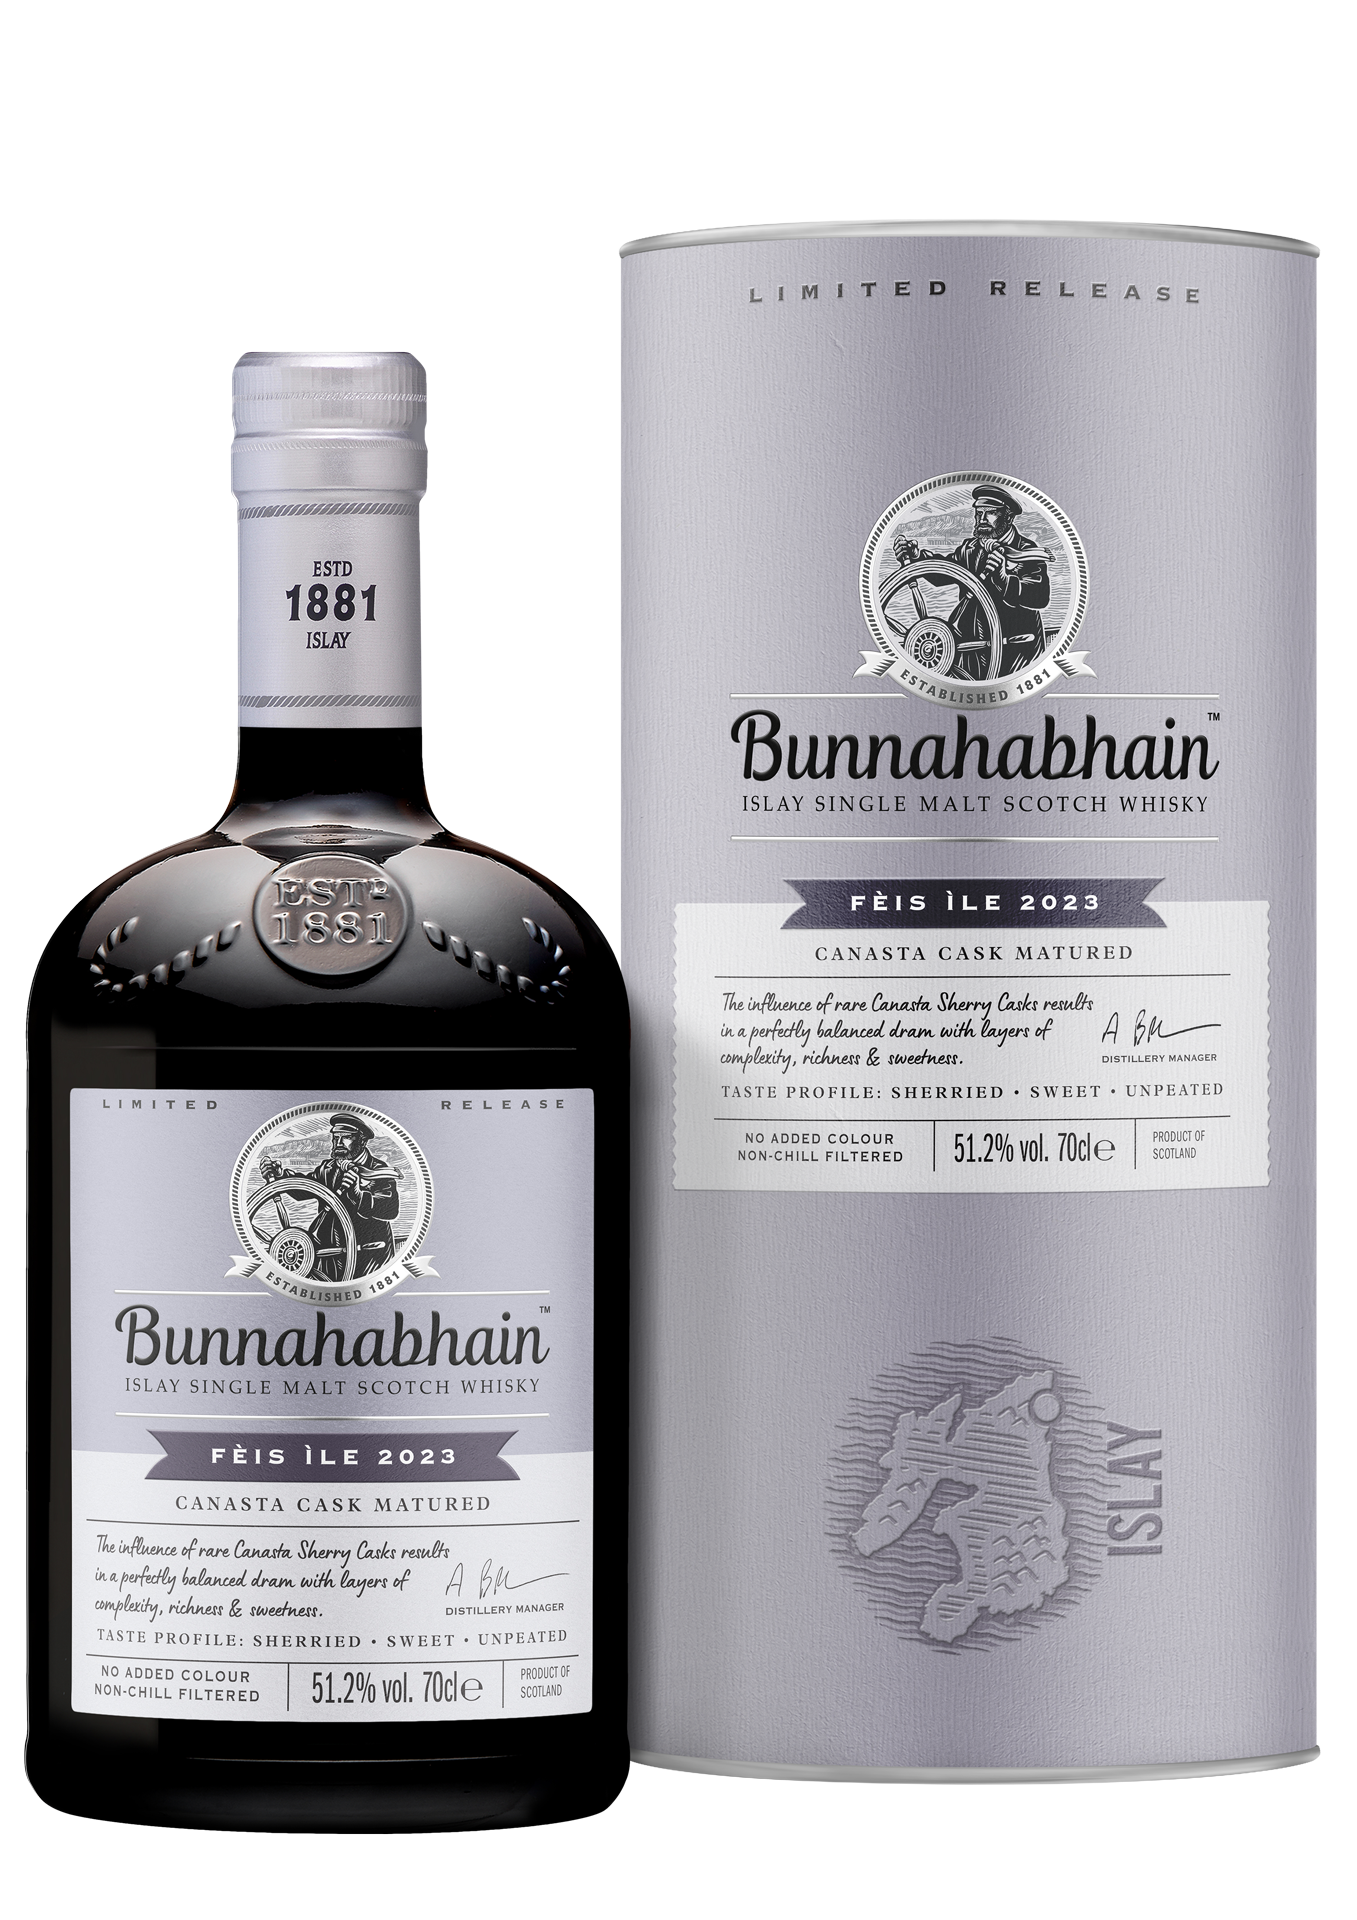 Bunnahabhain Releases Limited Edition Expression Celebrating Feis Ile 2023